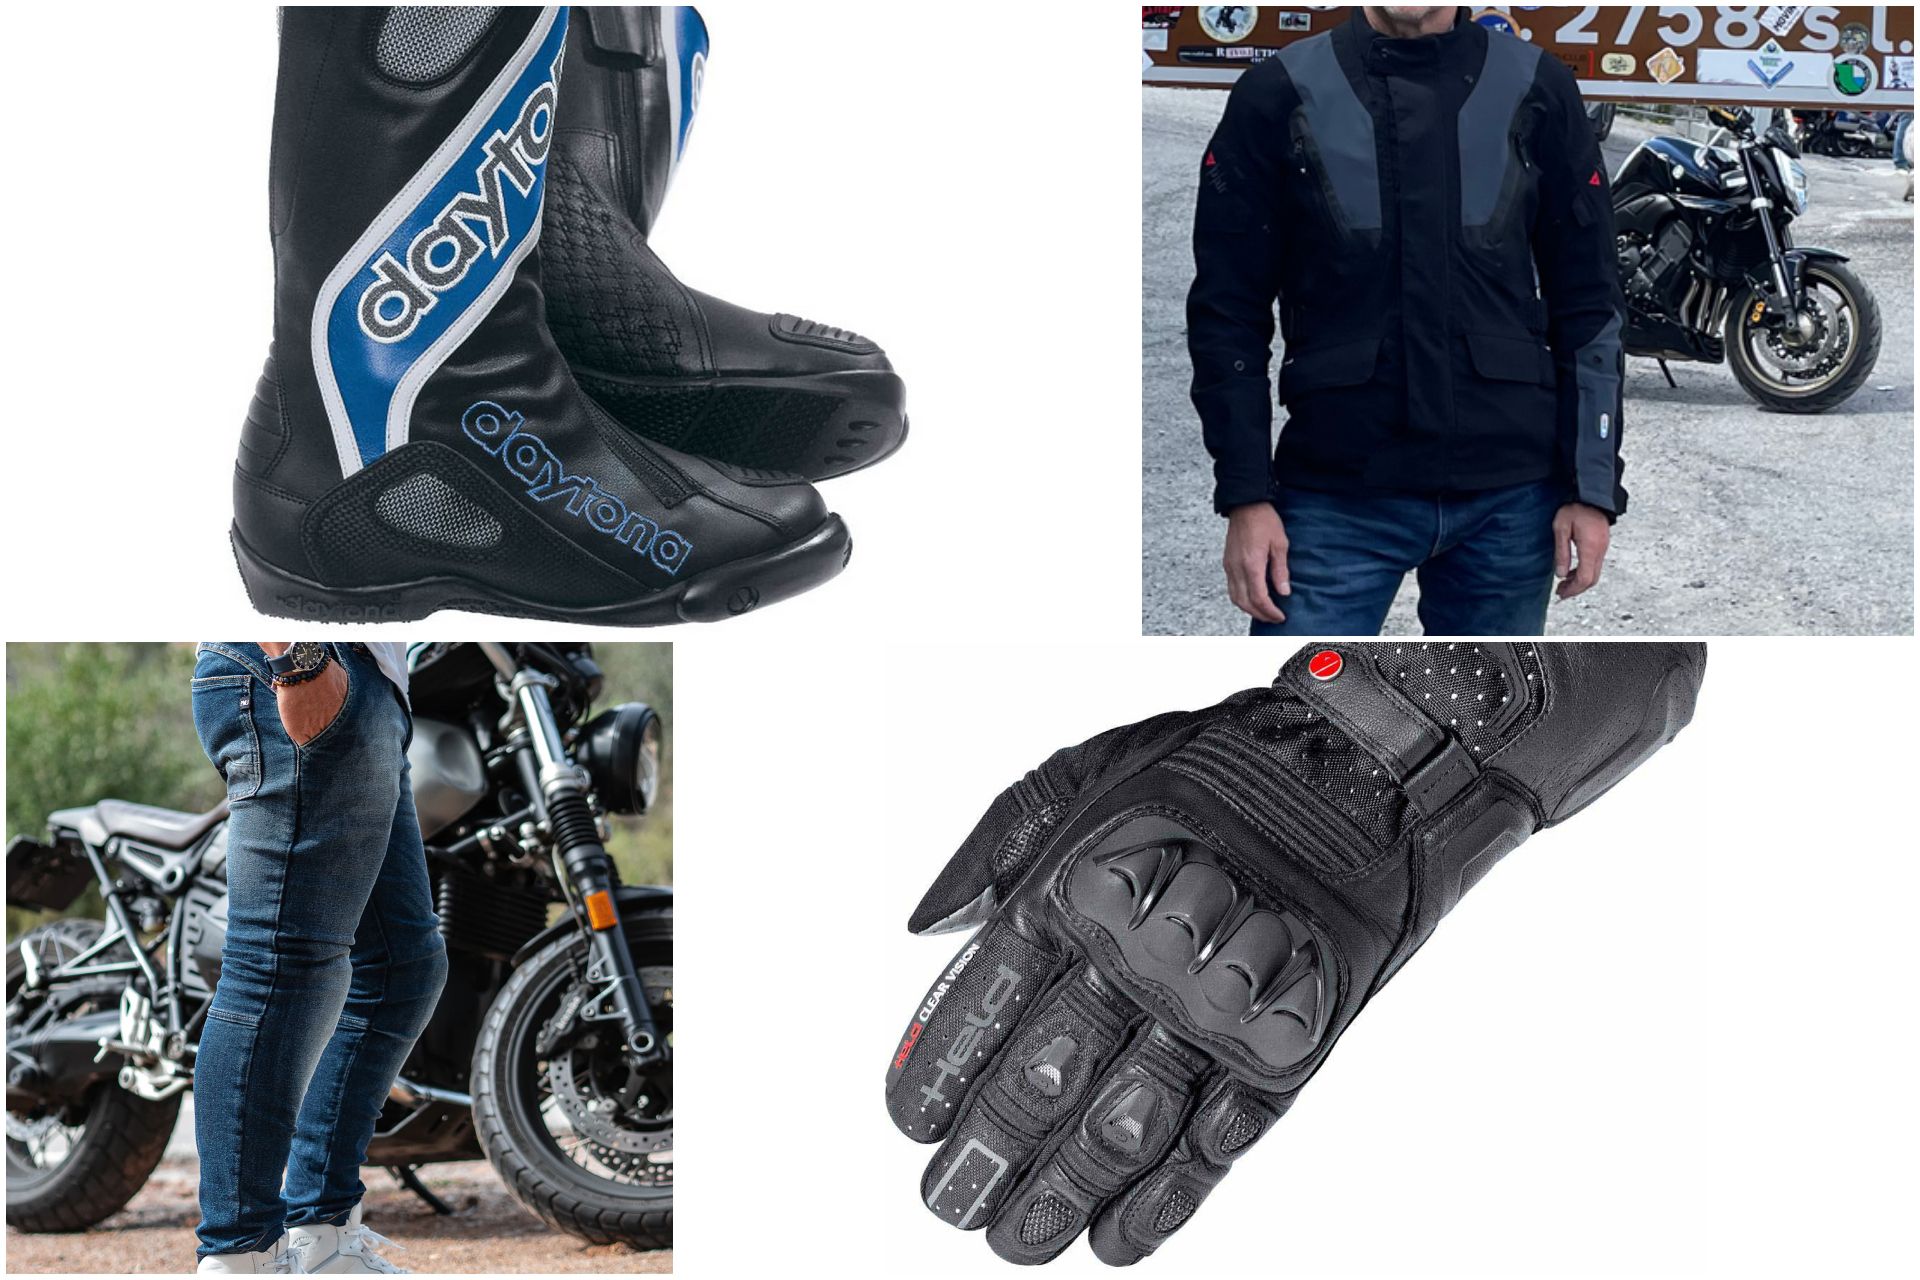 Best Motorcycle Riding Gear & Equipment For a Safe Ride